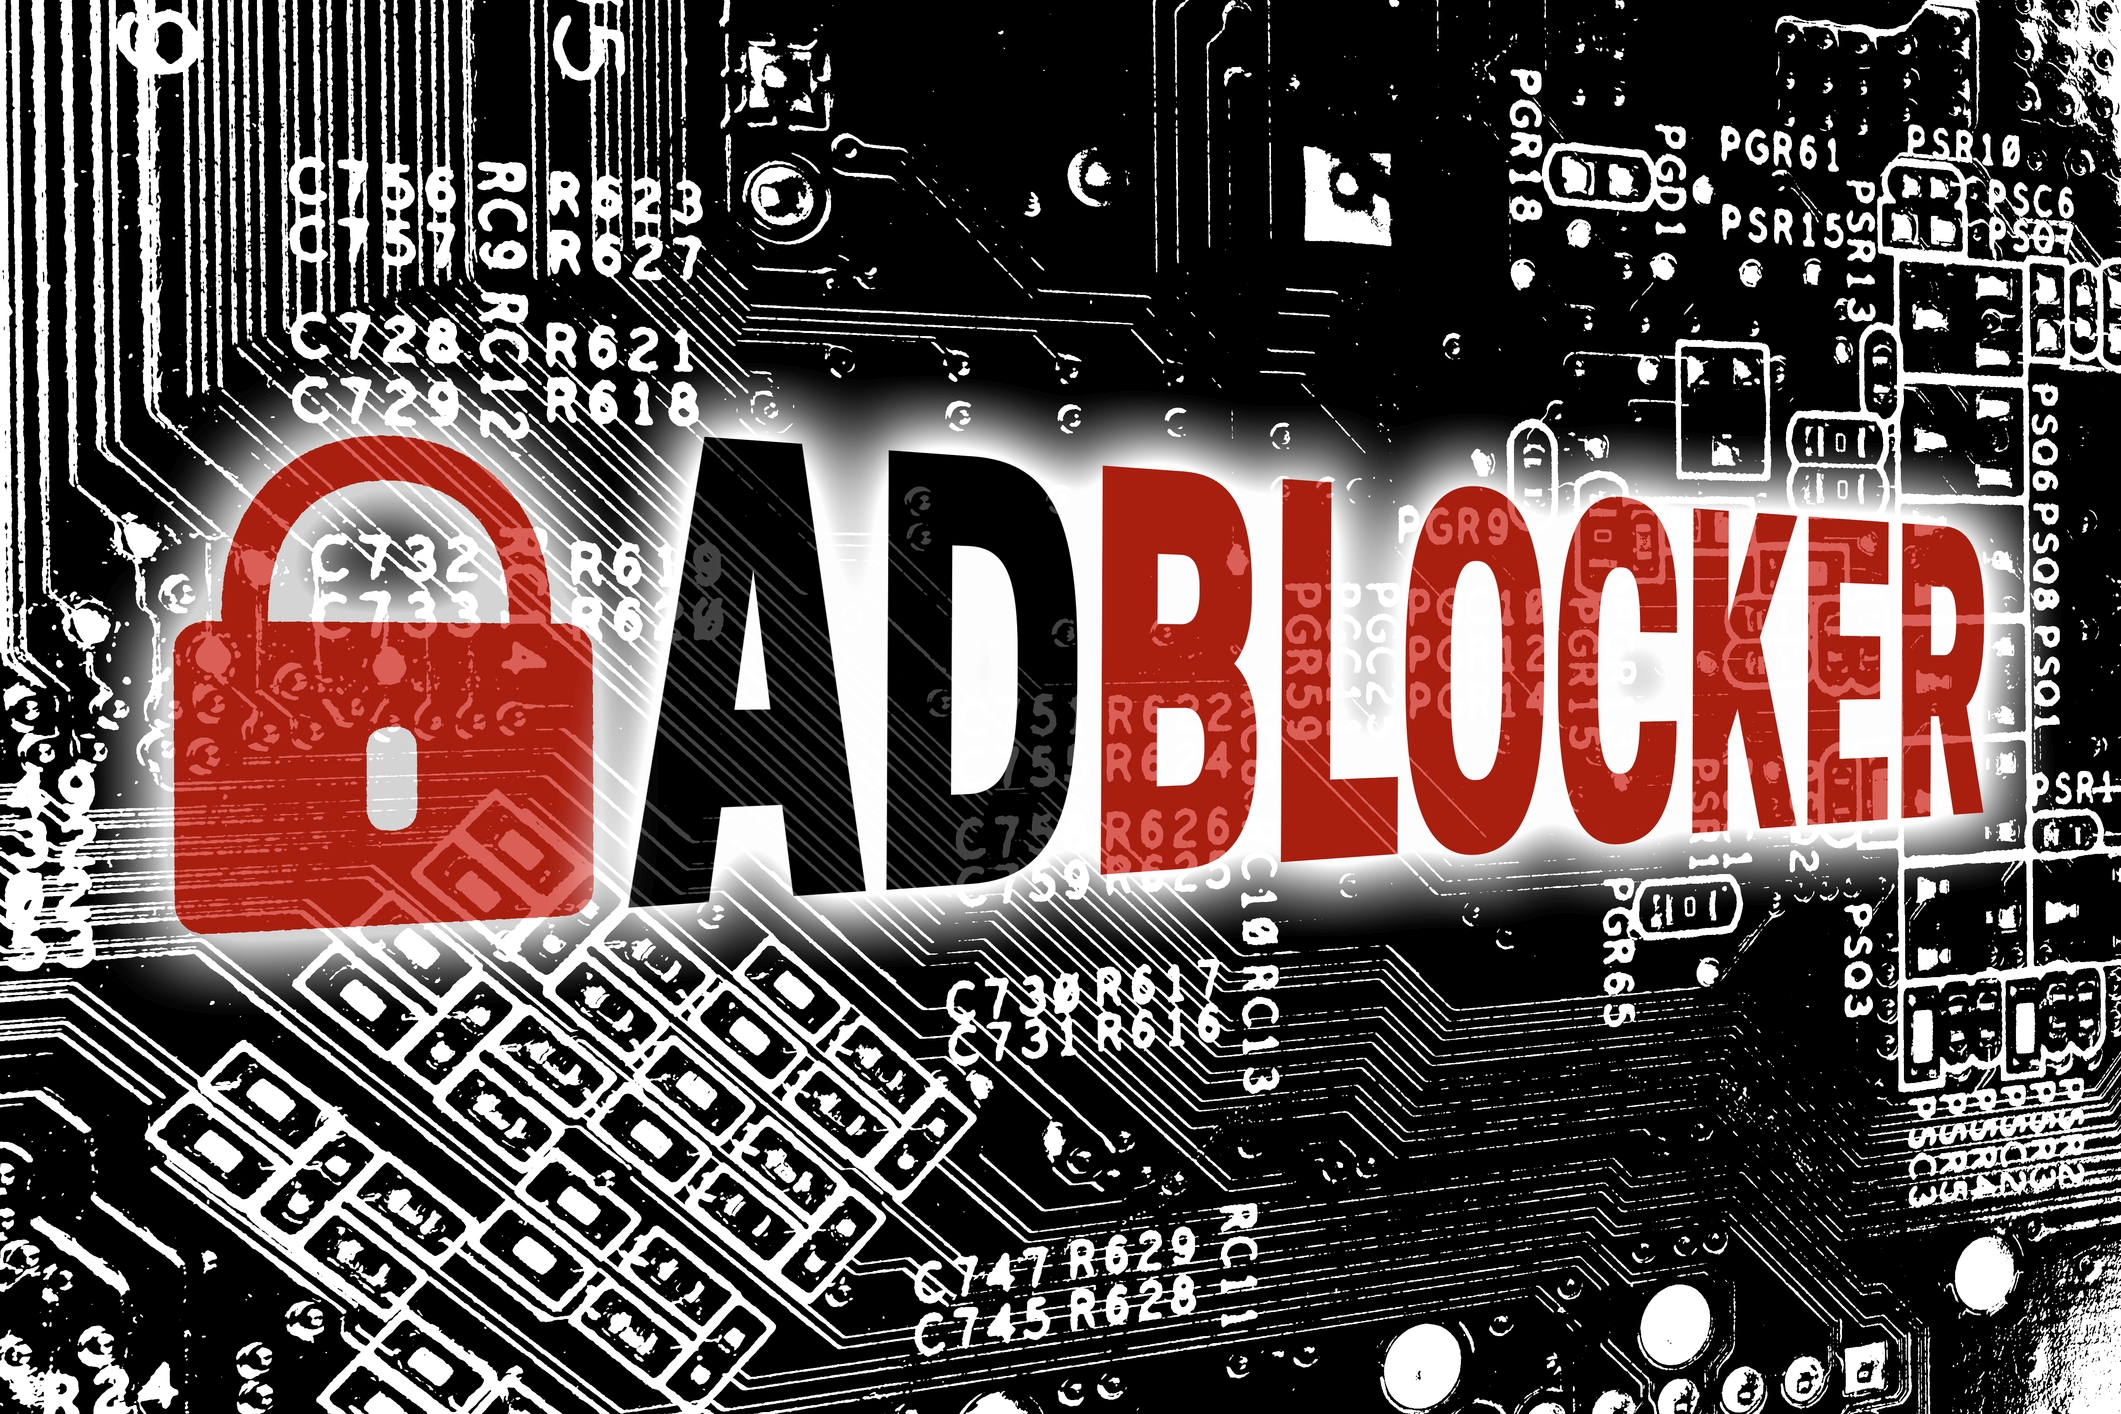 Bone of contention for decades: ad blockers